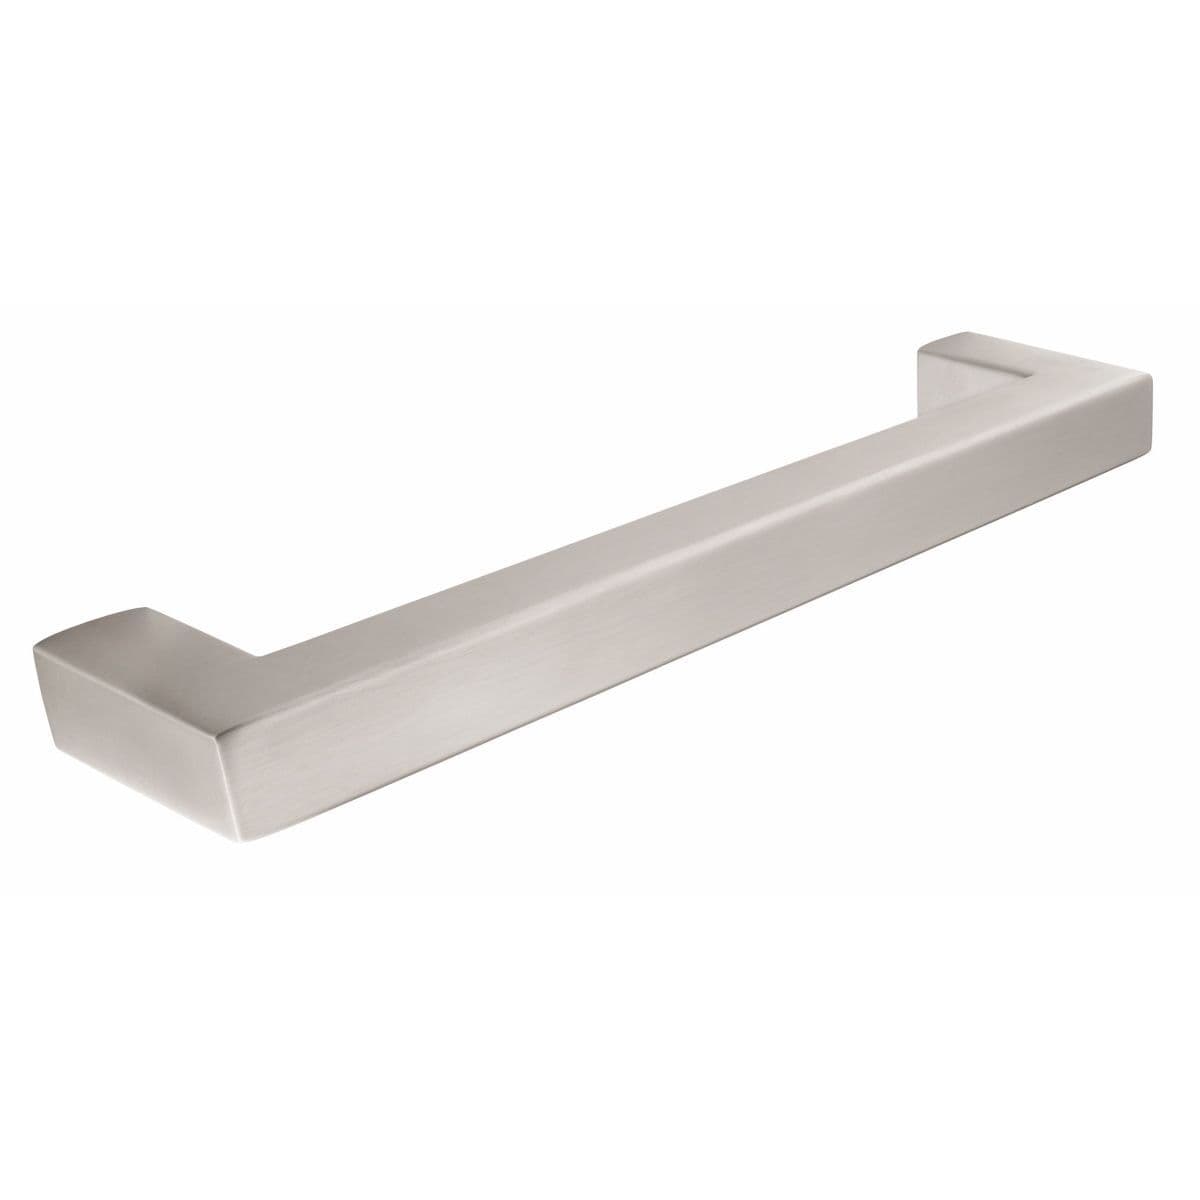 CARLTON BAR Cupboard Handle - 160mm h/c size - POLISHED S/STEEL EFFECT finish (PWS H918.160.SS)